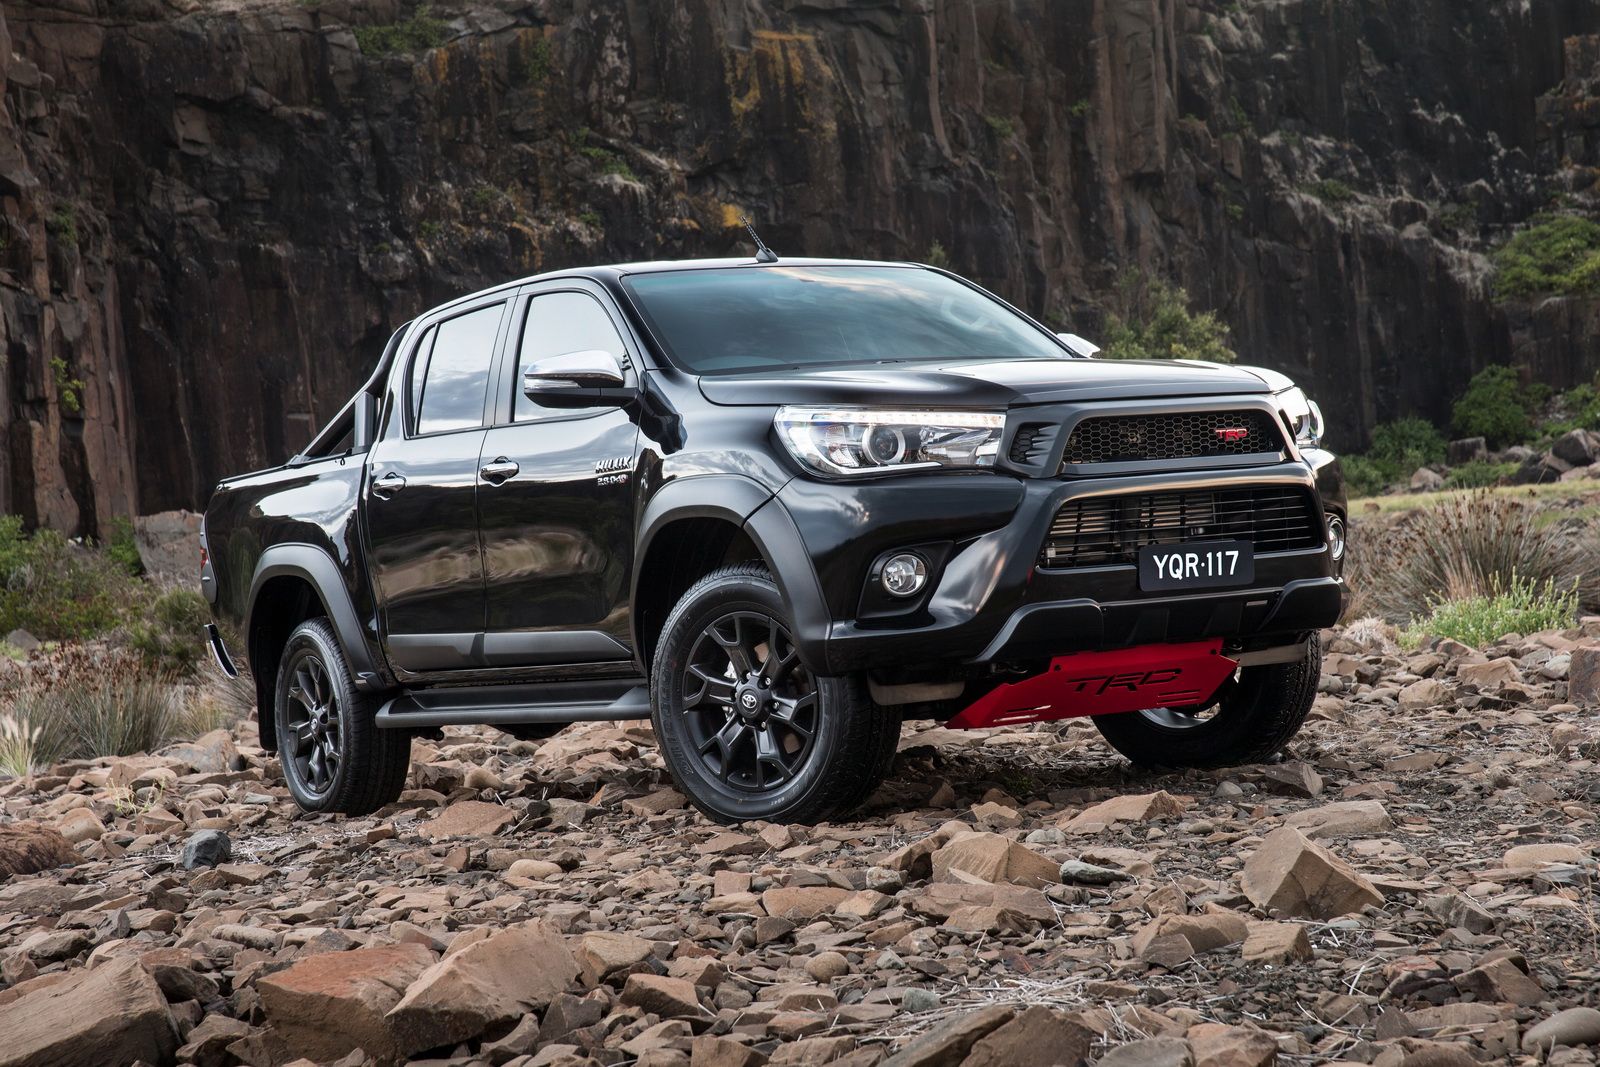 Toyota Hilux TRD Pack Brings Enhanced Look For Australia. Carscoops. Toyota hilux, Toyota, Ford ranger